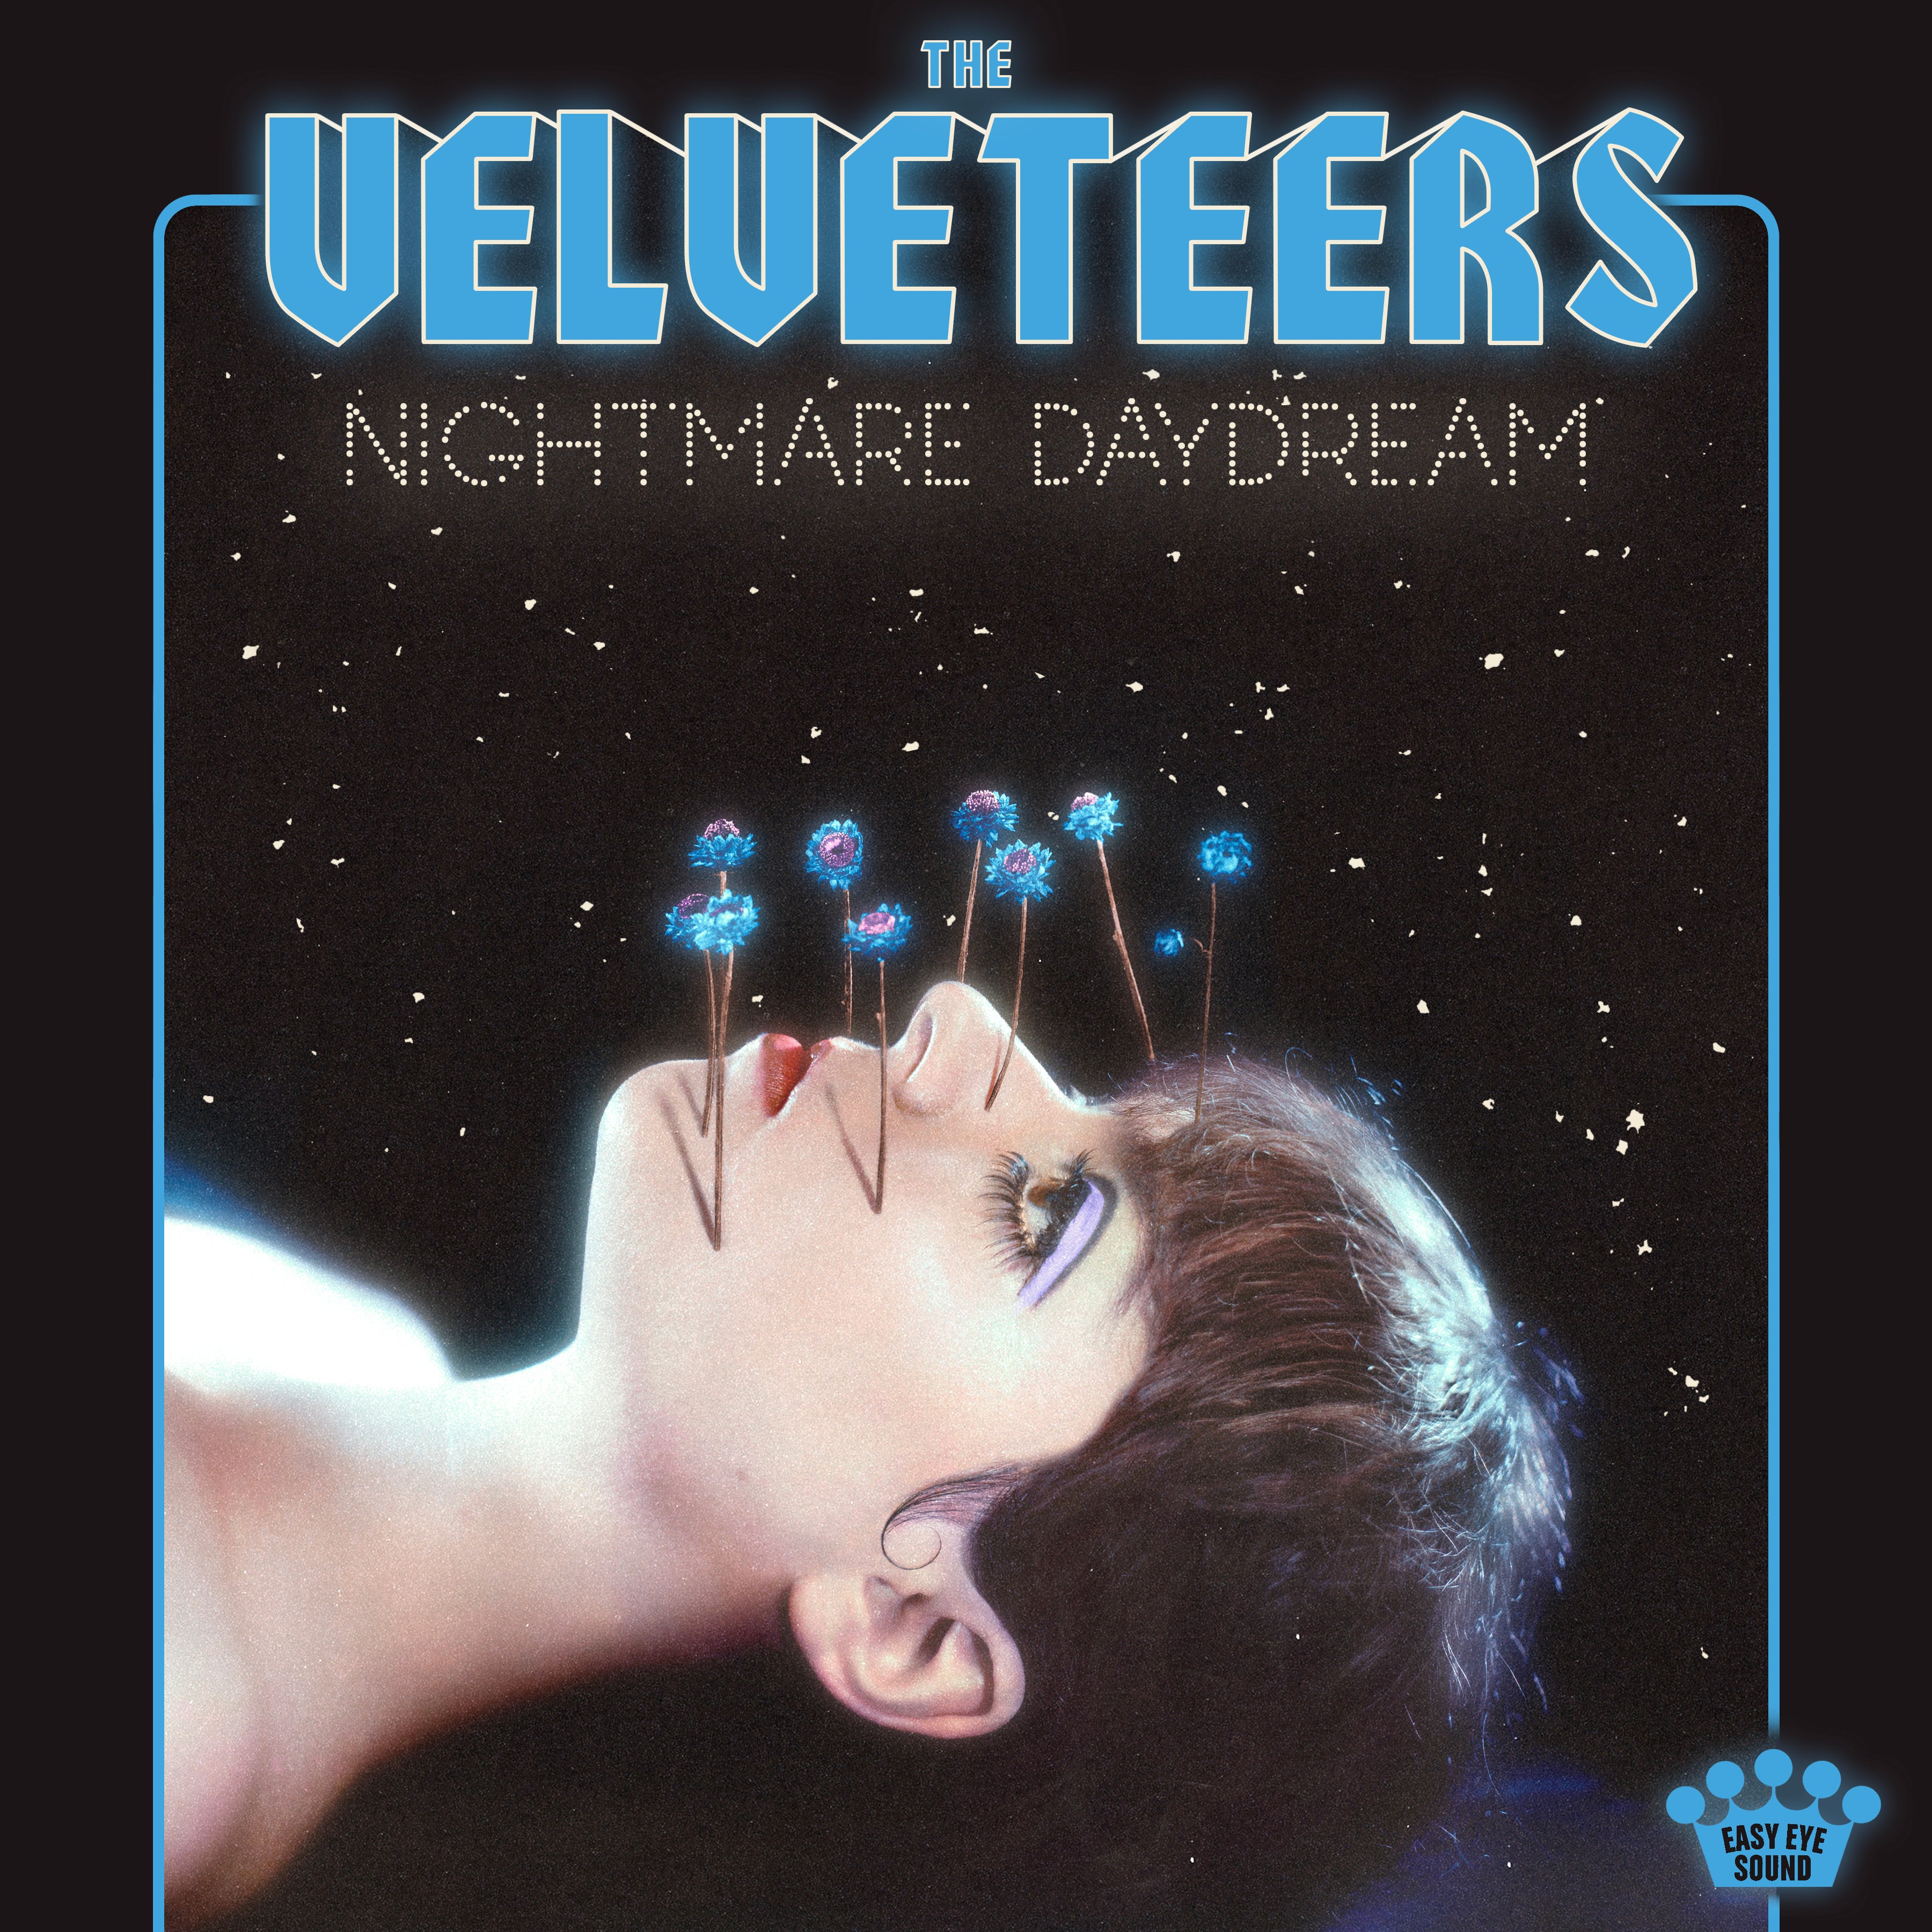 THE VELVETEERS’ ‘NIGHTMARE DAYDREAM’ IS AVAILABLE NOW